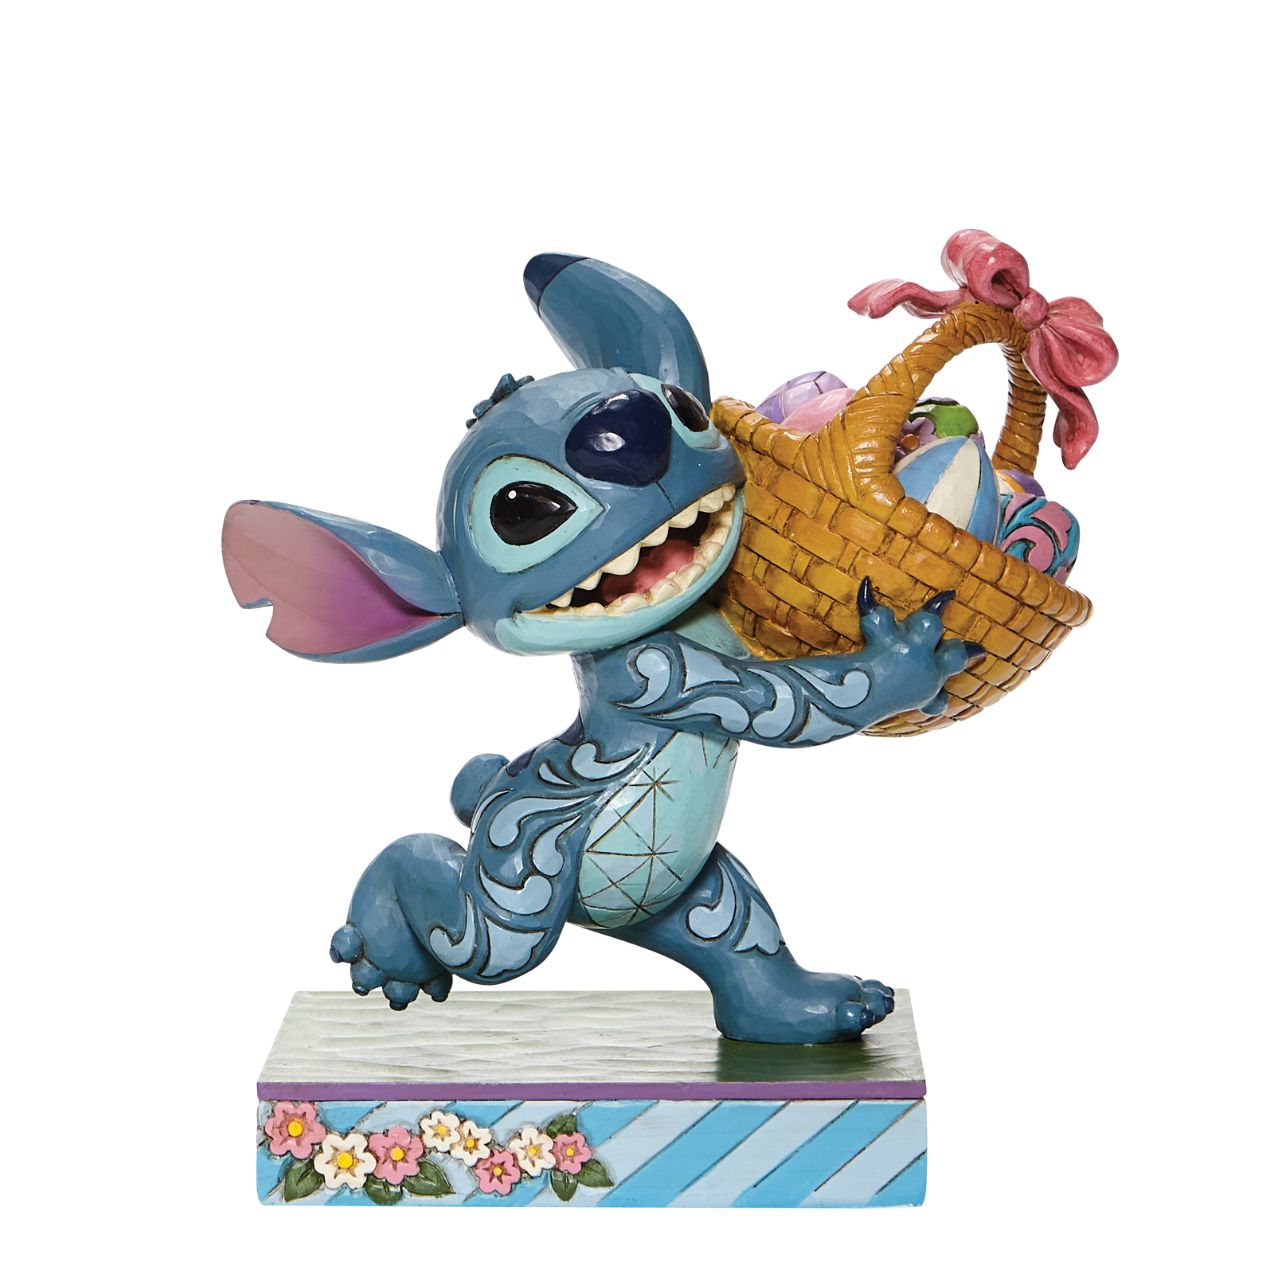 Jim Shore Bizarre Bunny - Stitch Running off with Easter Basket Figurine  Mischievous Stitch has taken off with your Easter basket so try and catch him if you can or entice him with his favourite, "Coconut Cake"| Designed by Jim Shore, this fun-loving Disney Traditions piece is hand-painted in cheery springtime hues.